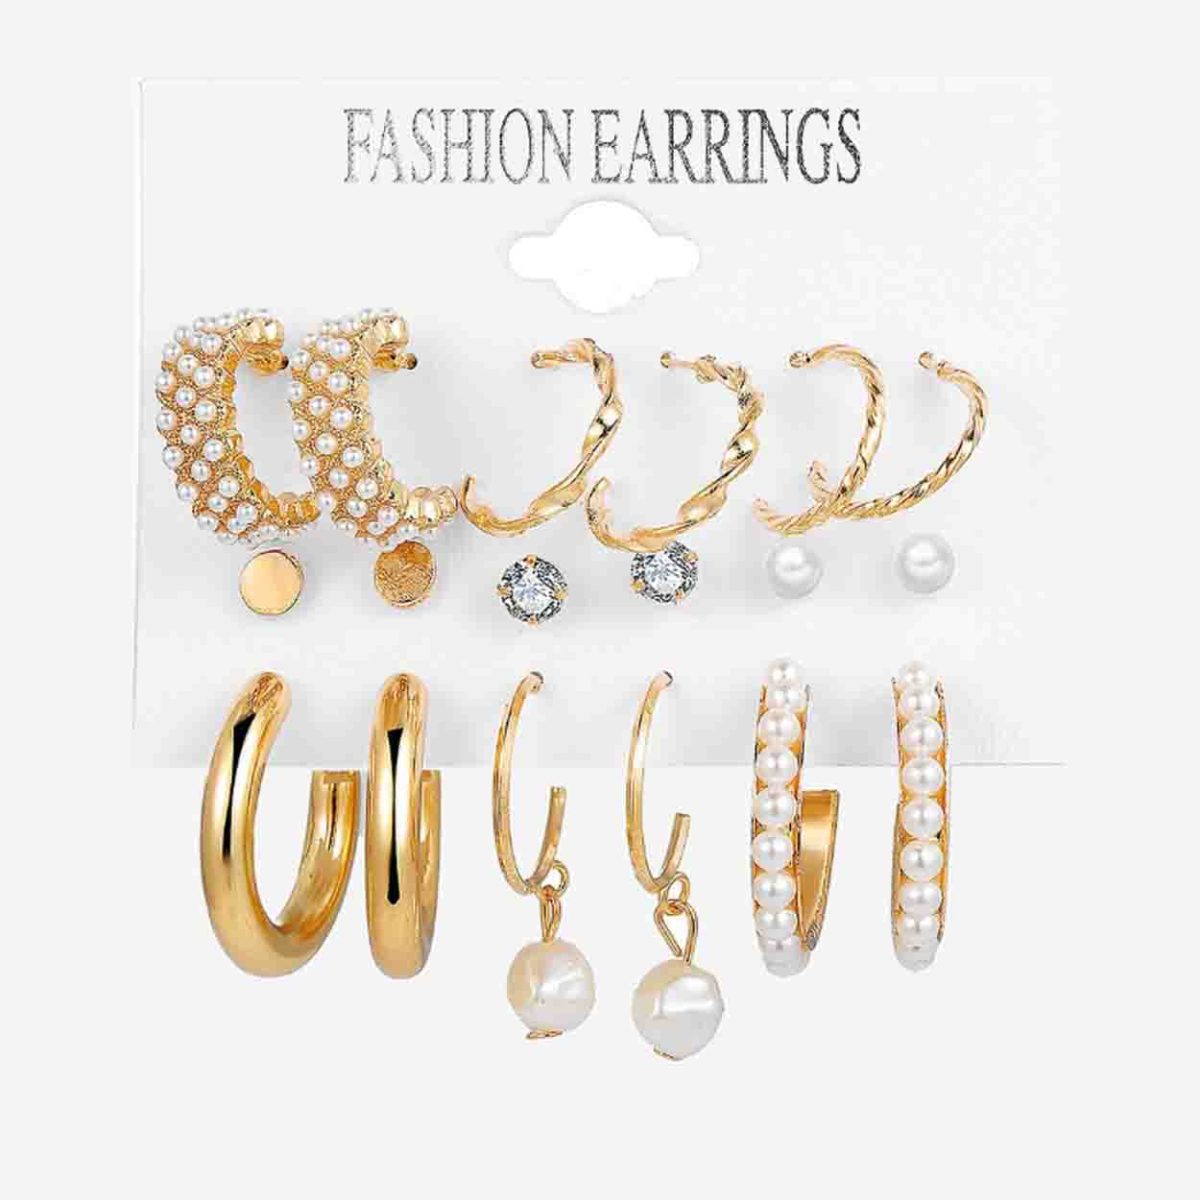 A collection of six pairs of earrings jewelry to Pakistan in different styles, including studs, hoops, drops, and dangles.